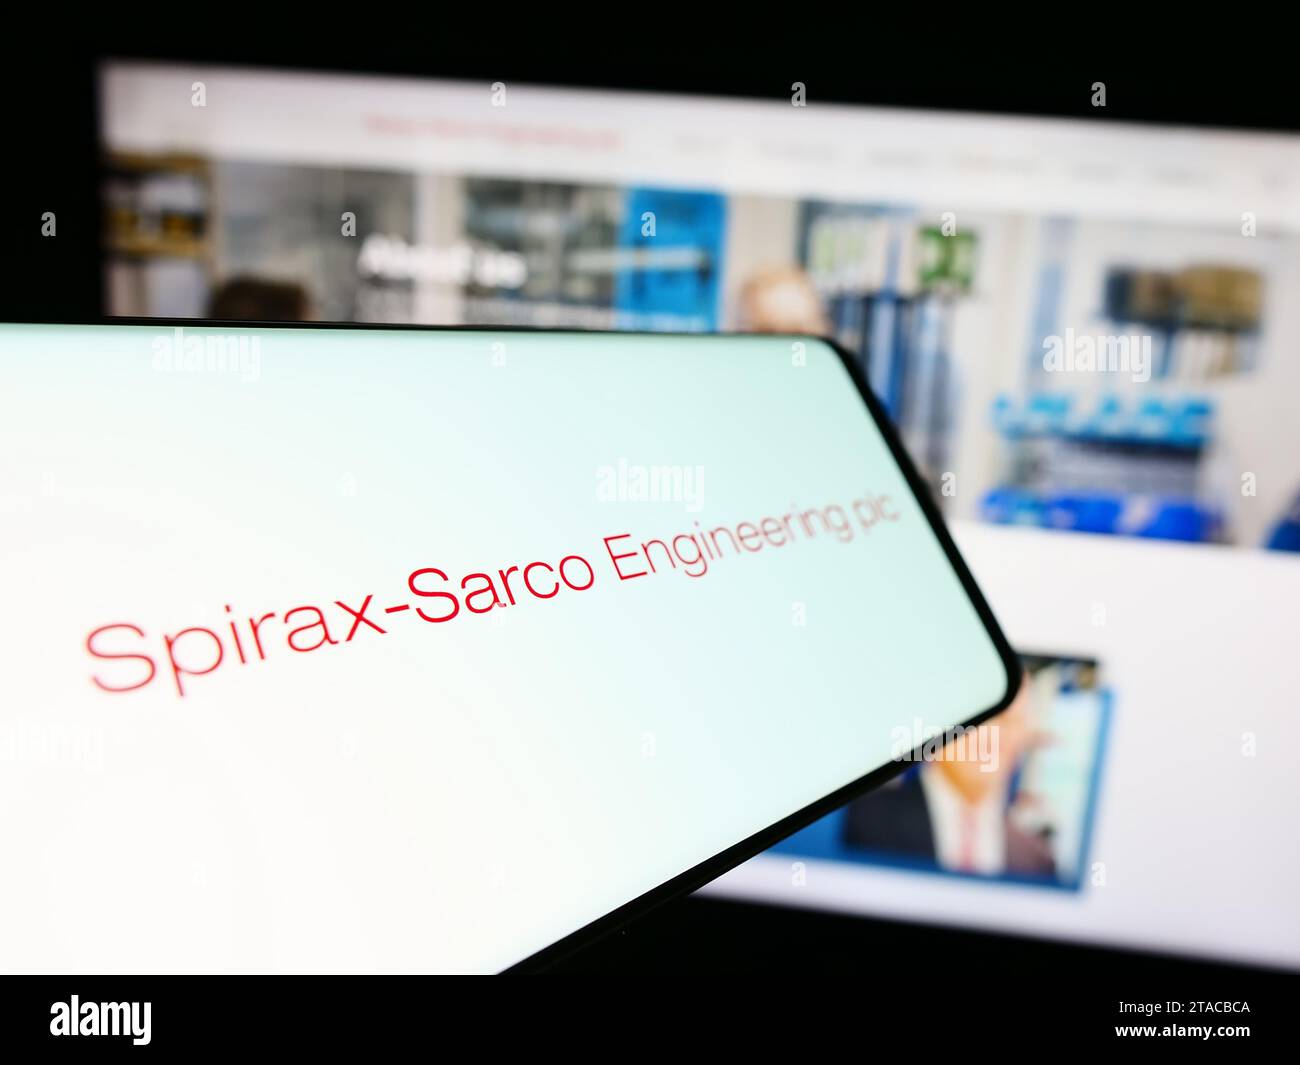 Mobile phone with logo of British company Spirax-Sarco Engineering plc in front of business website. Focus on center-left of phone display. Stock Photo